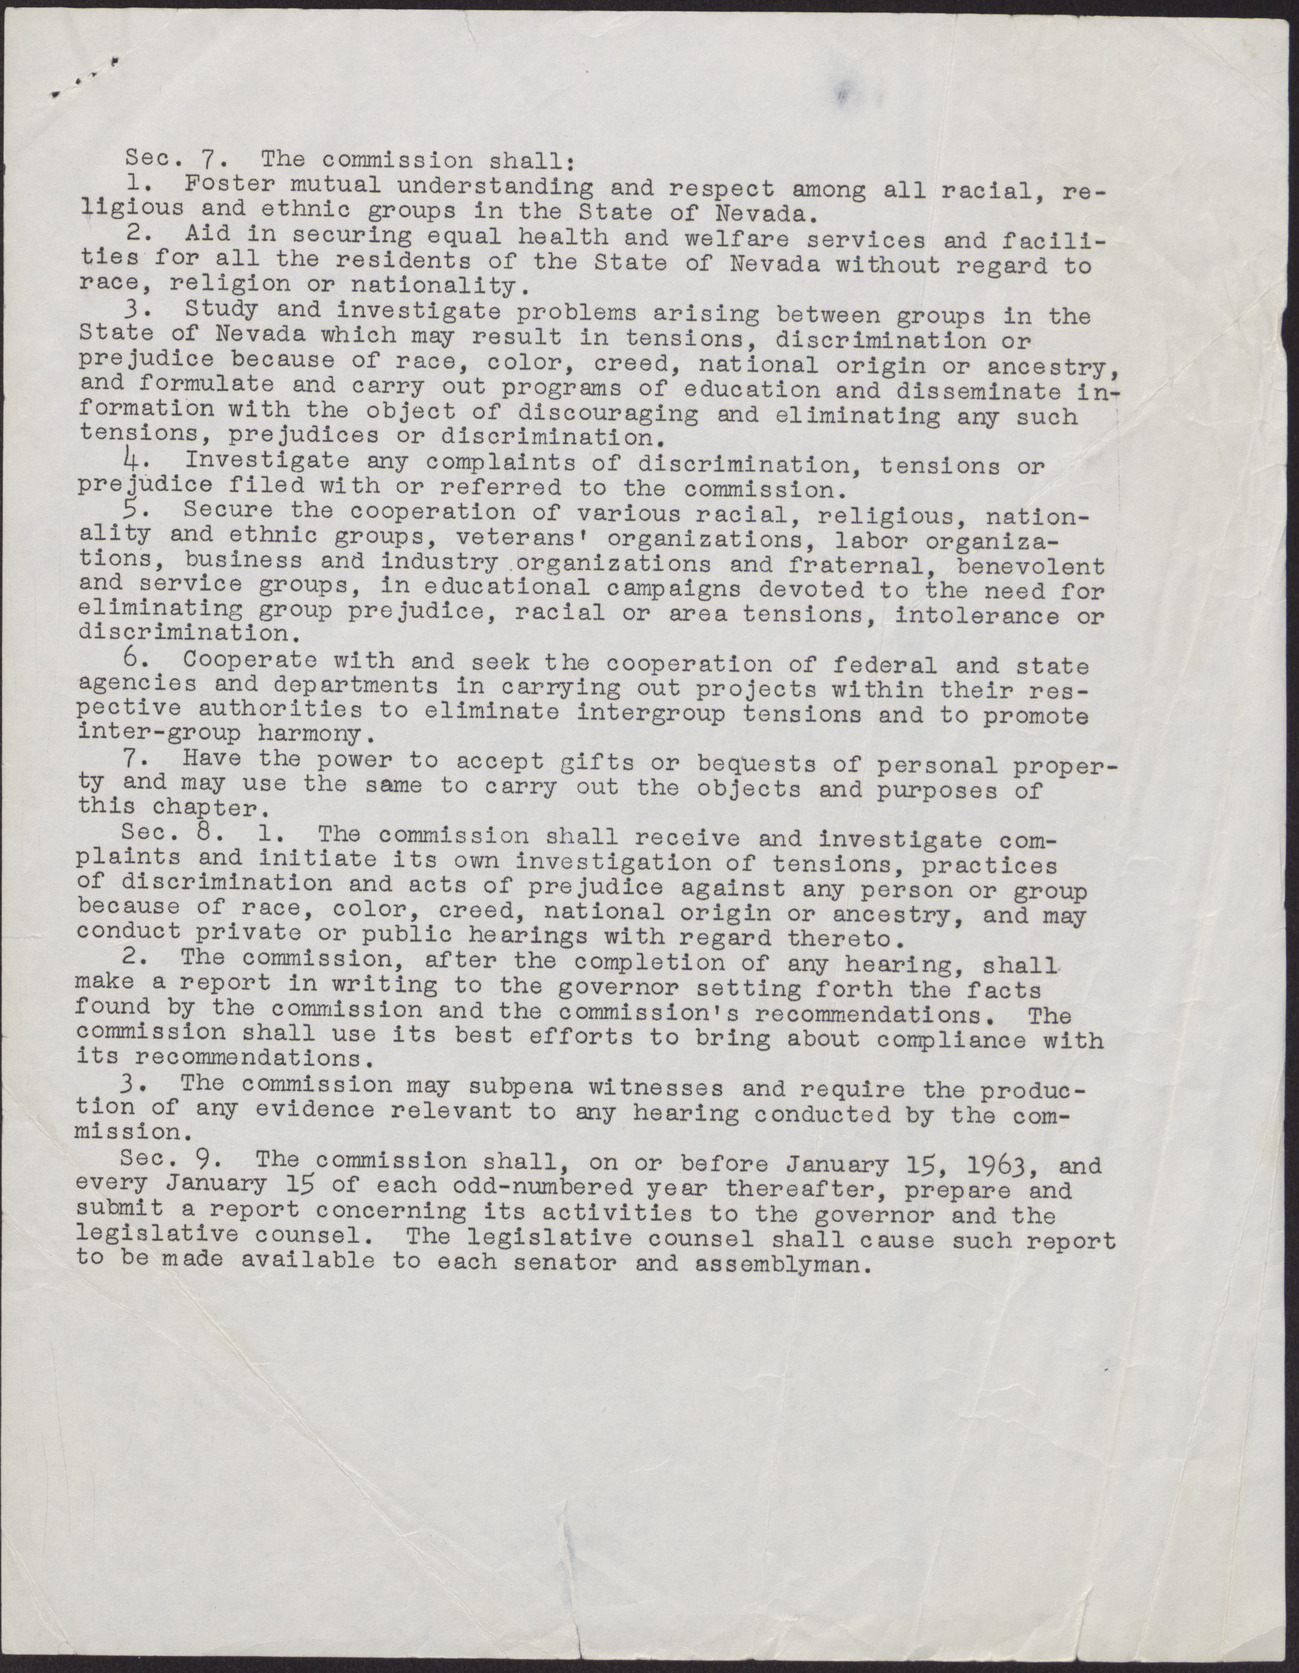 Summary of Senate Bill No. 246 (2 pages), March 30, 1961, page 2